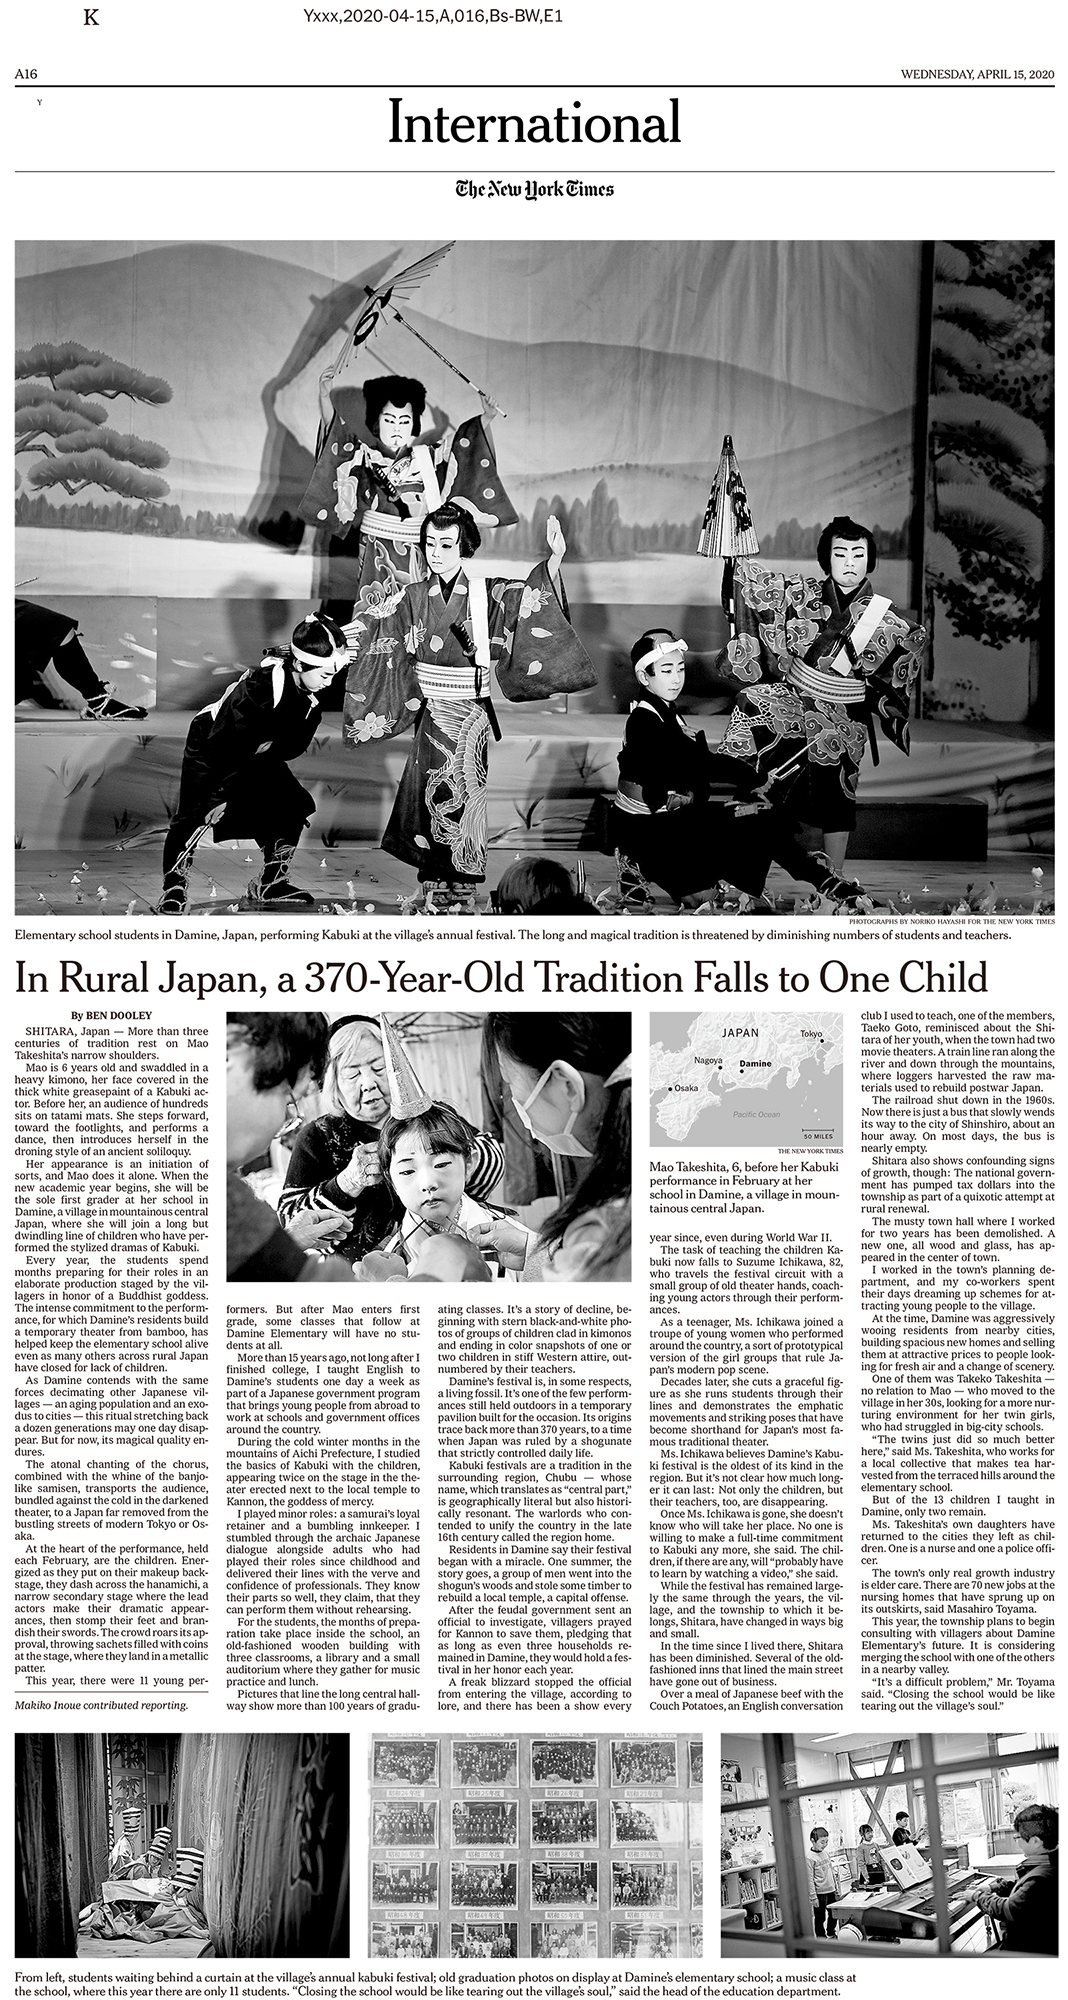 NYT#NYTimes#04-15-2020#National#1#ForDress#1#cci